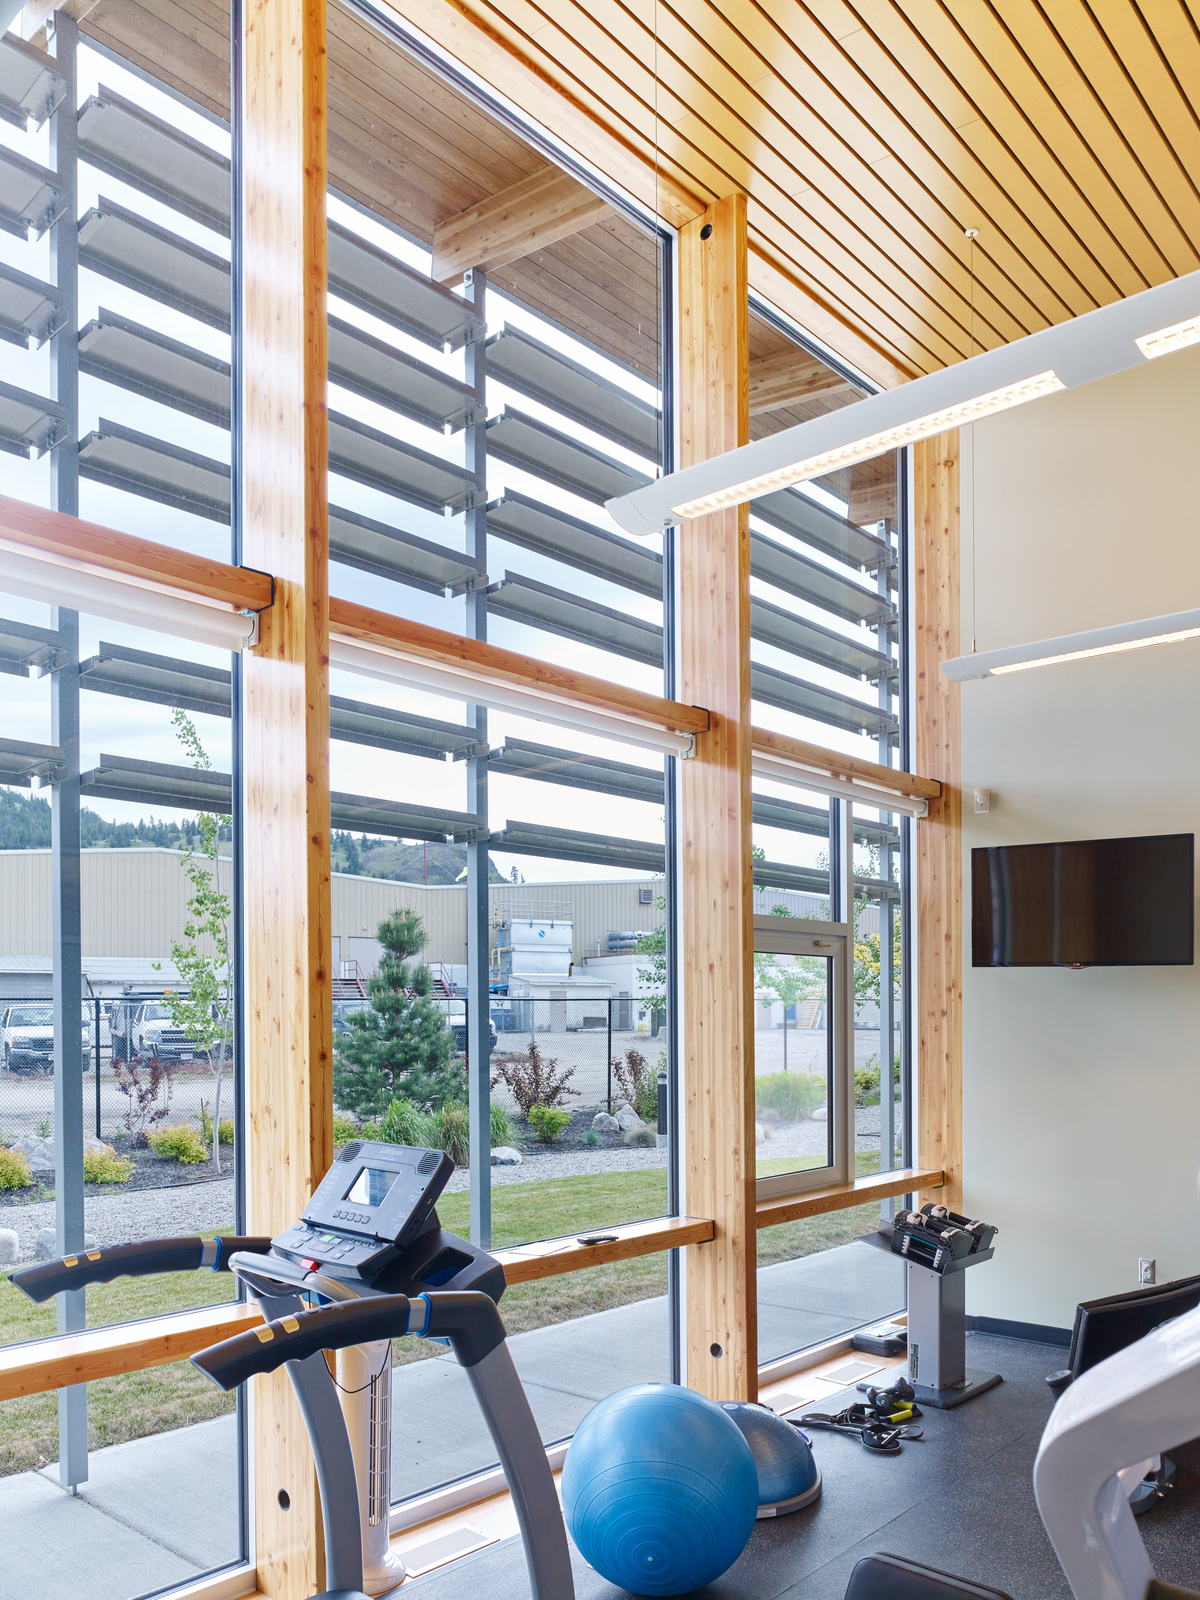 Interior sunny daytime view highlighting use of vertical mass timber columns and decorative dimensional lumber ceiling inside Summerland RCMP Detachment exercise room